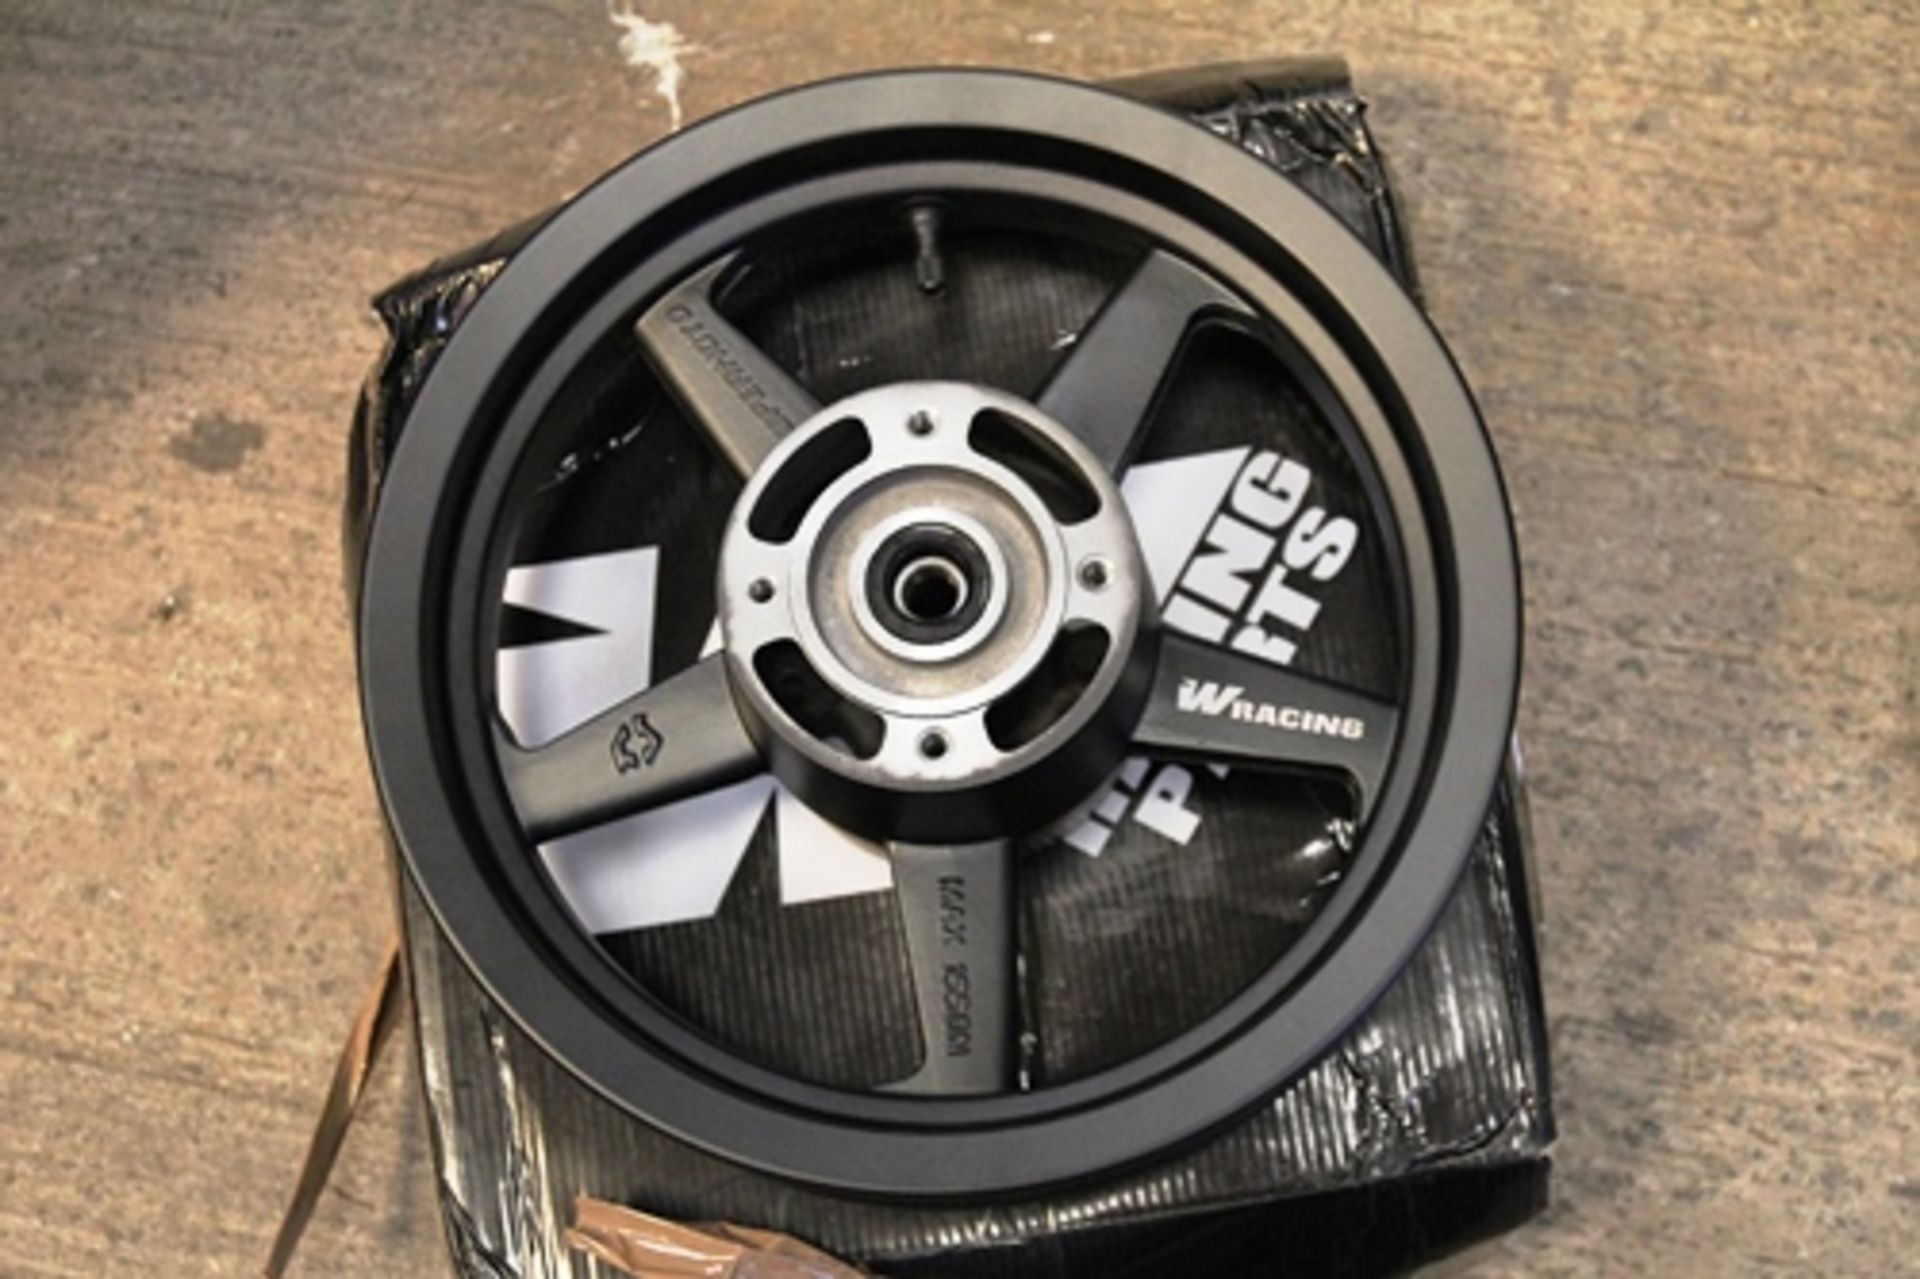 2 x alloy moped wheels, black, front 2.15/2, rear 2.50/12 - New (Bay 39) - Image 3 of 4